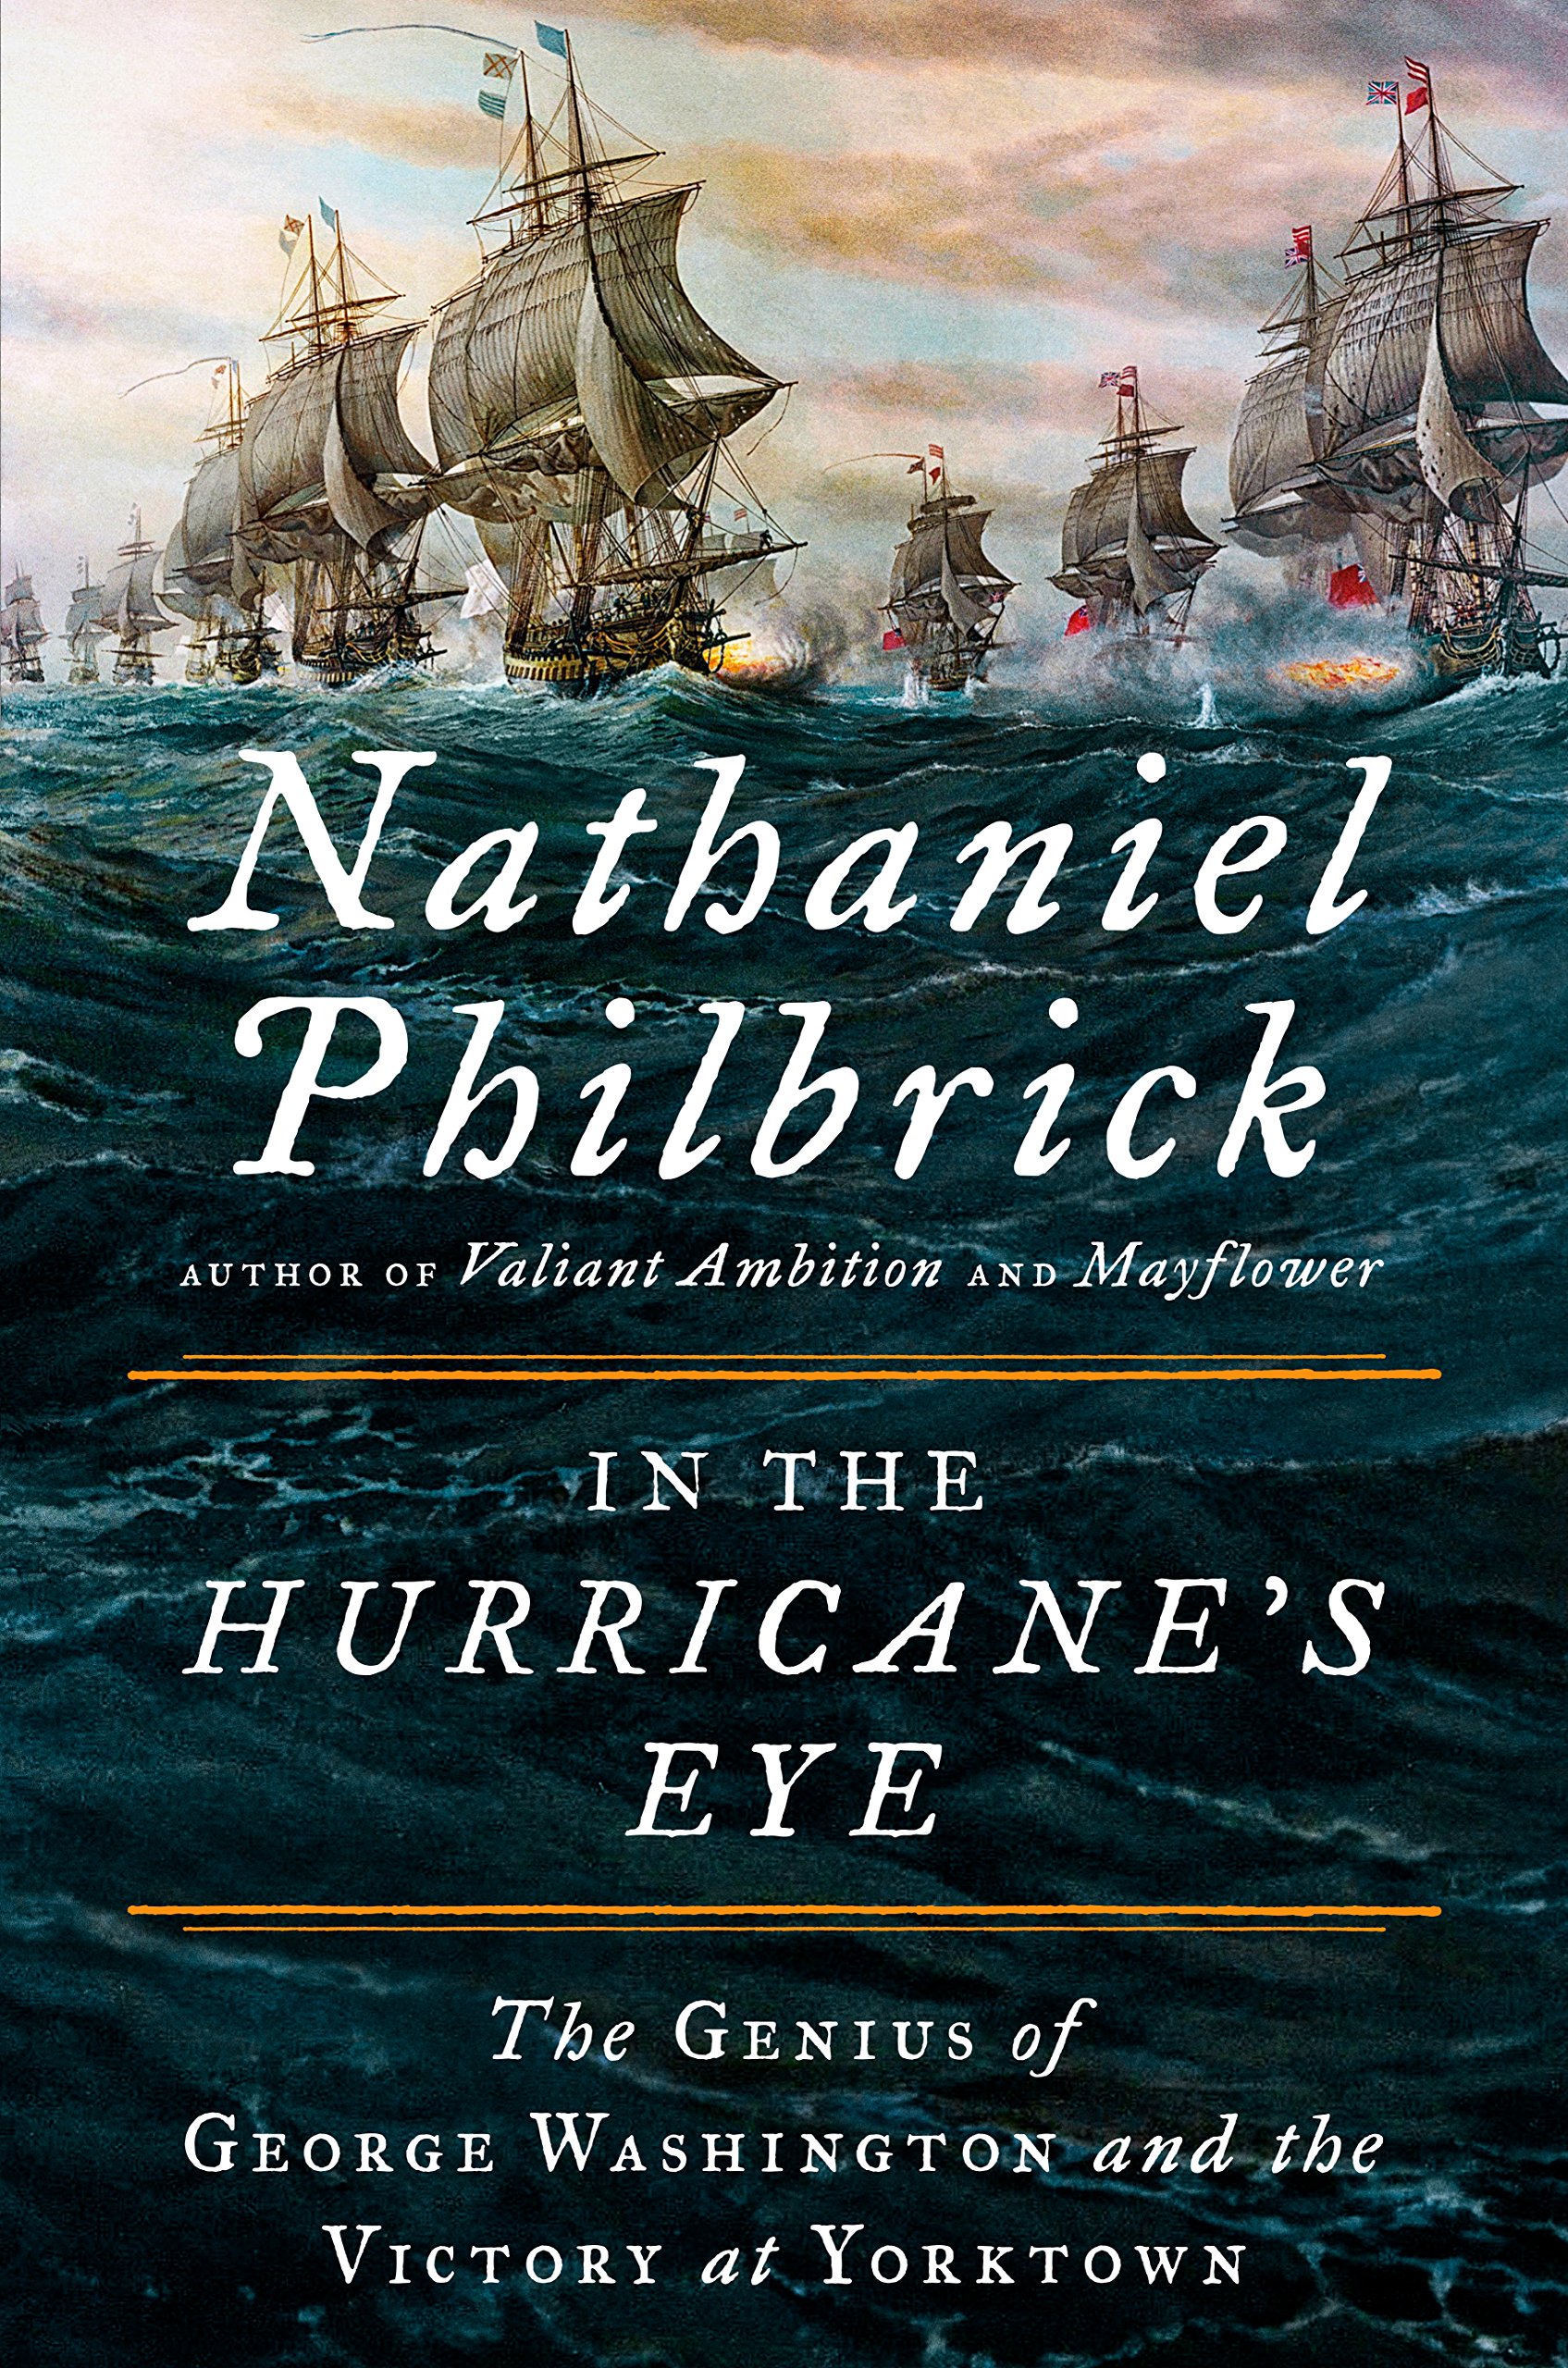 Book Cover In the Hurricane's Eye: The Genius of George Washington and the Victory at Yorktown (The American Revolution Series)